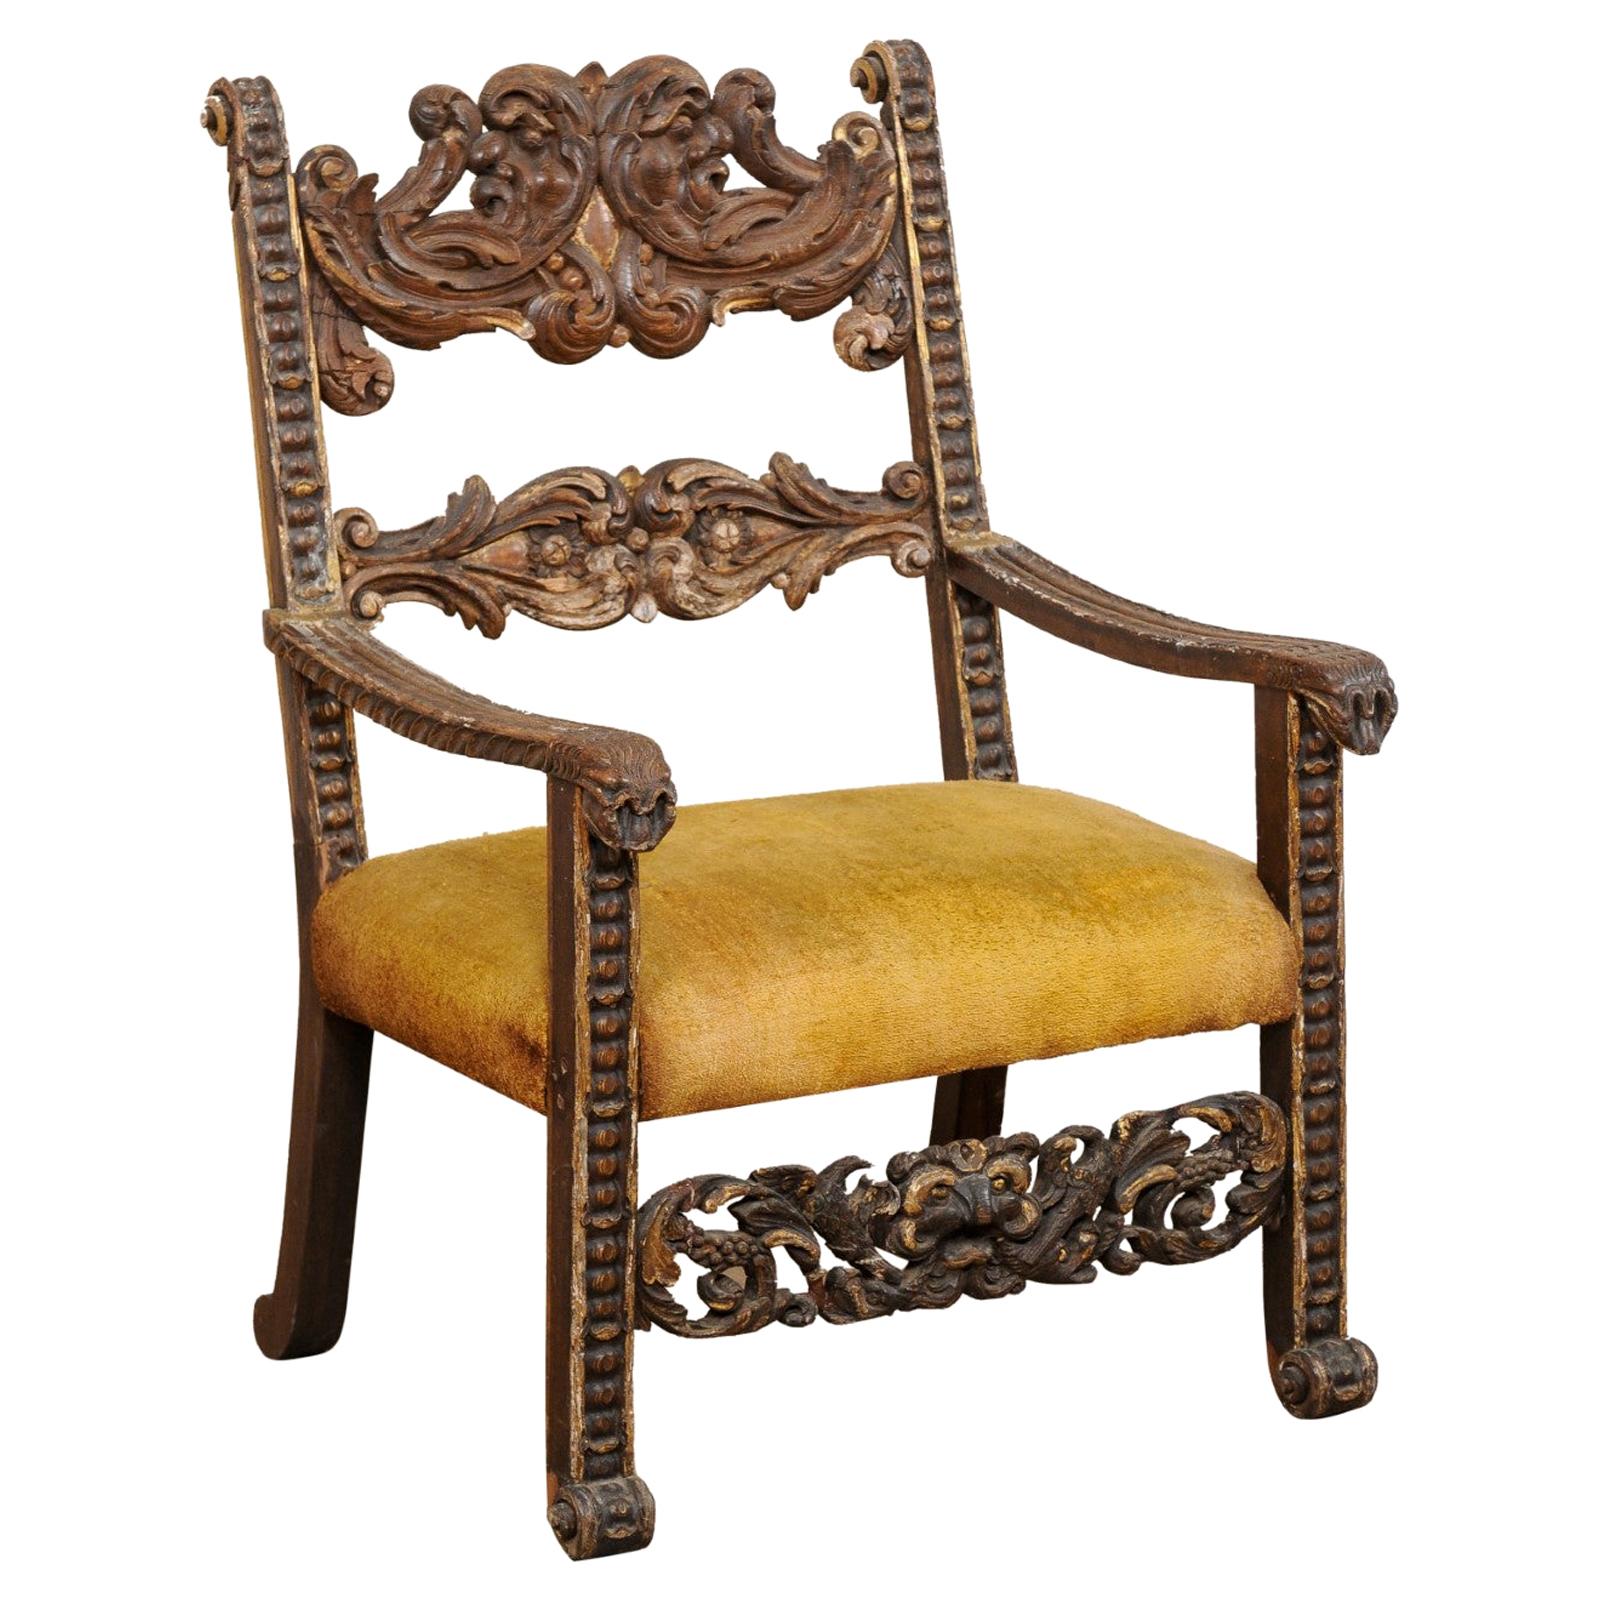 Handsome 18th C Italian Baroque Arm Chair with Intricately Carved Details For Sale